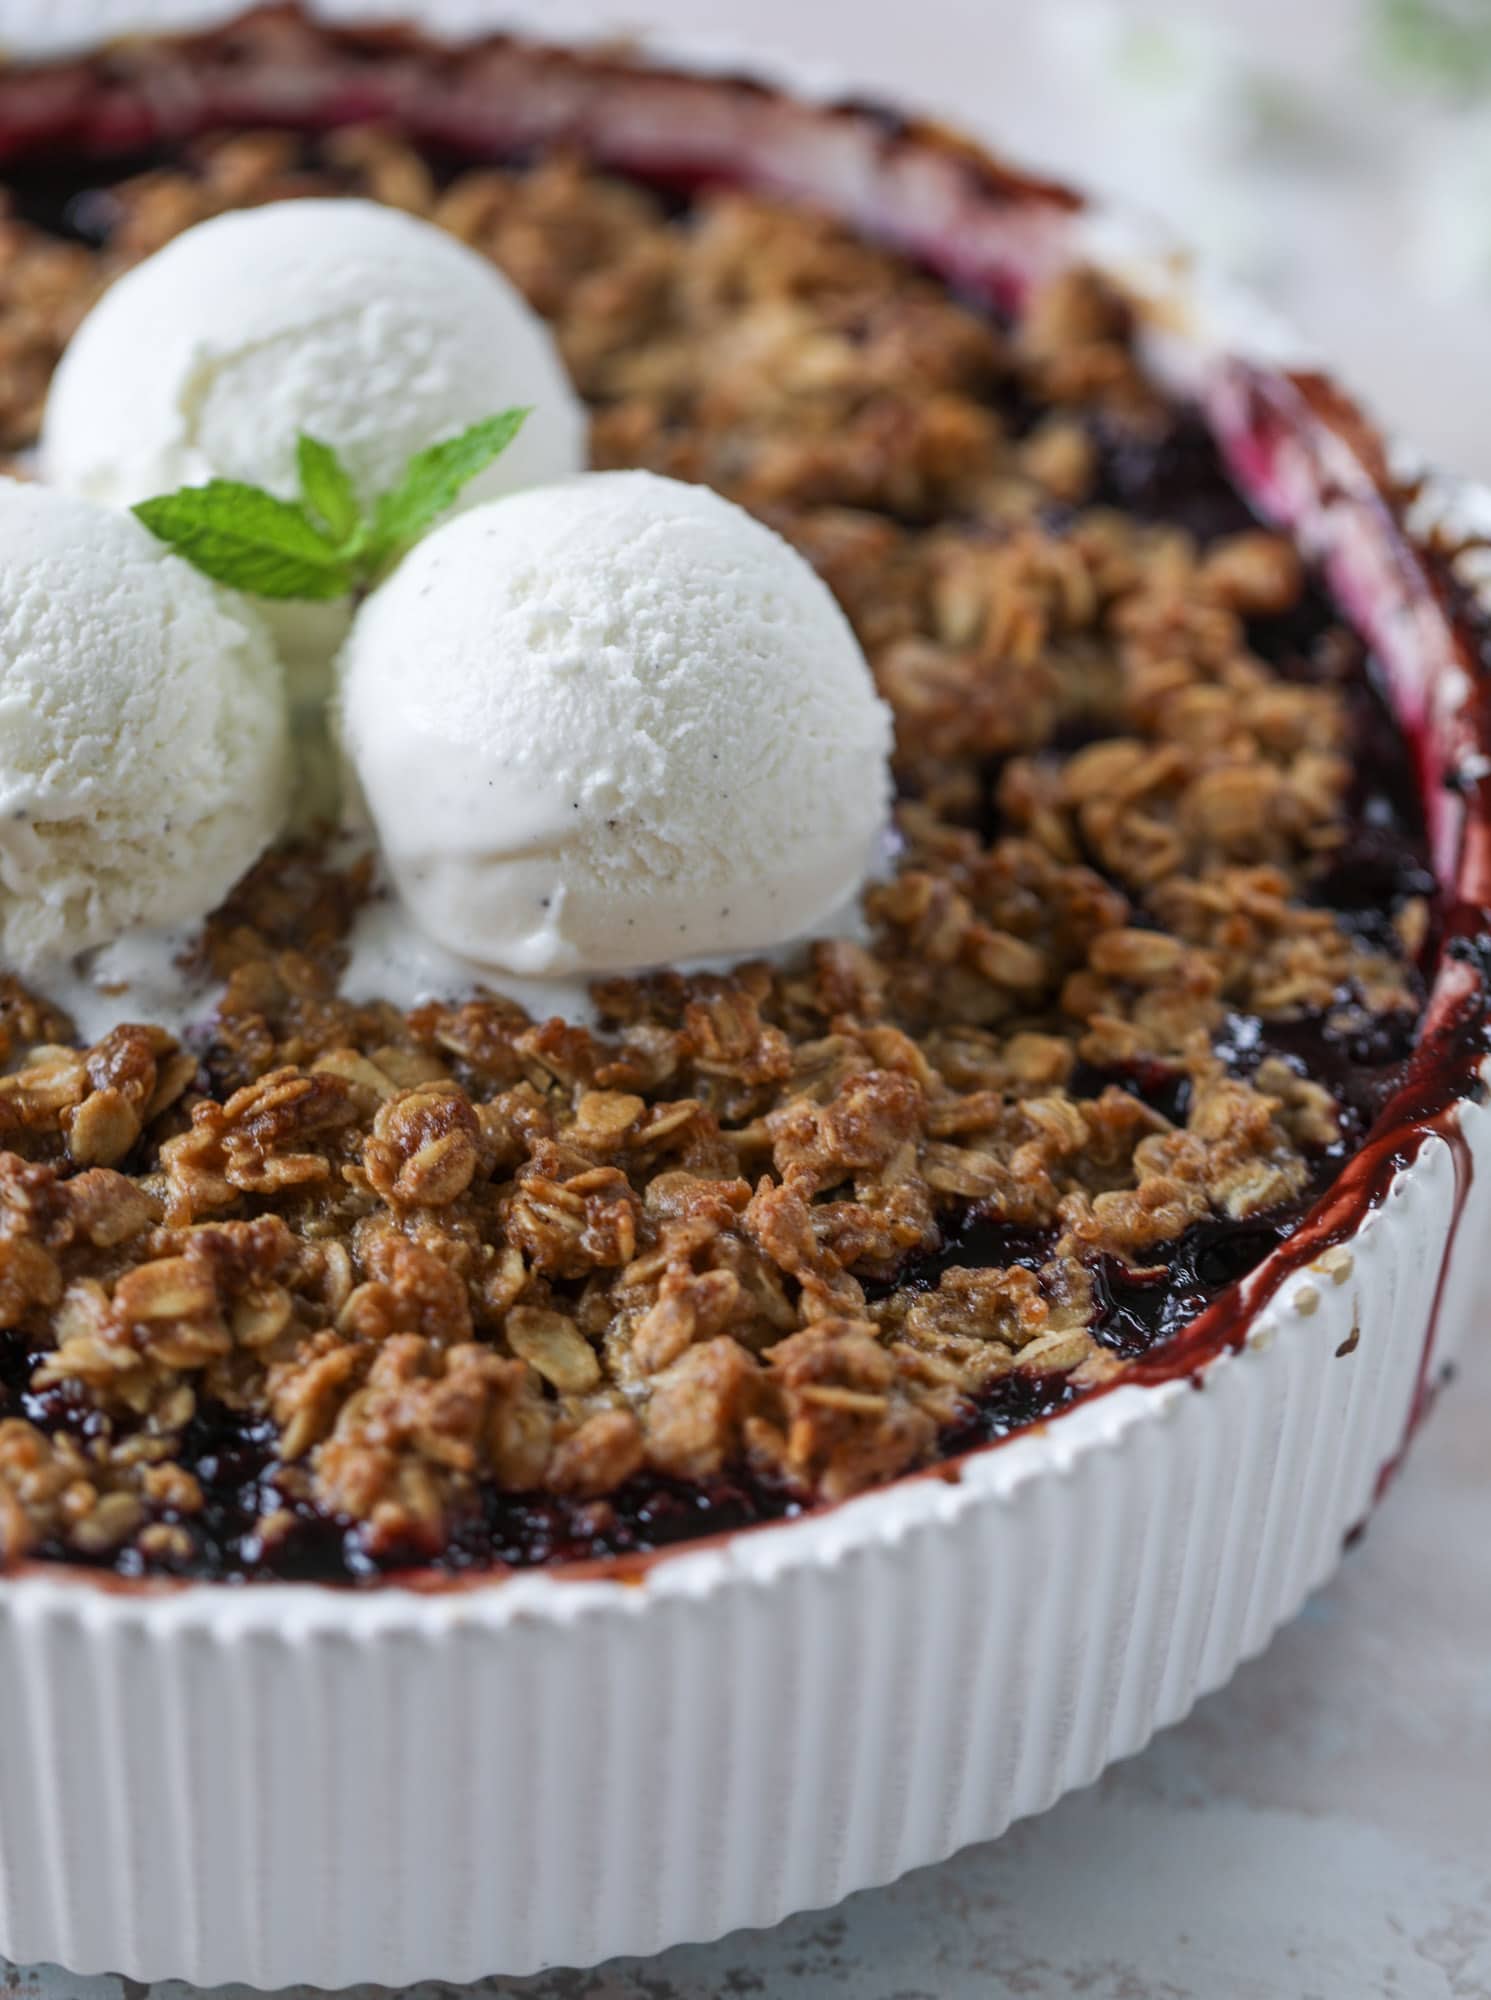 This blueberry crisp is warm and bursting with sweet and juicy fruit. It's topped with a quinoa oatmeal brown sugar topping and is the perfect dessert for summer. Served warm and topped with vanilla ice cream, it's just divine! I howsweeteats.com #blueberry #crisp #quinoa #oats #dessert #fruit 